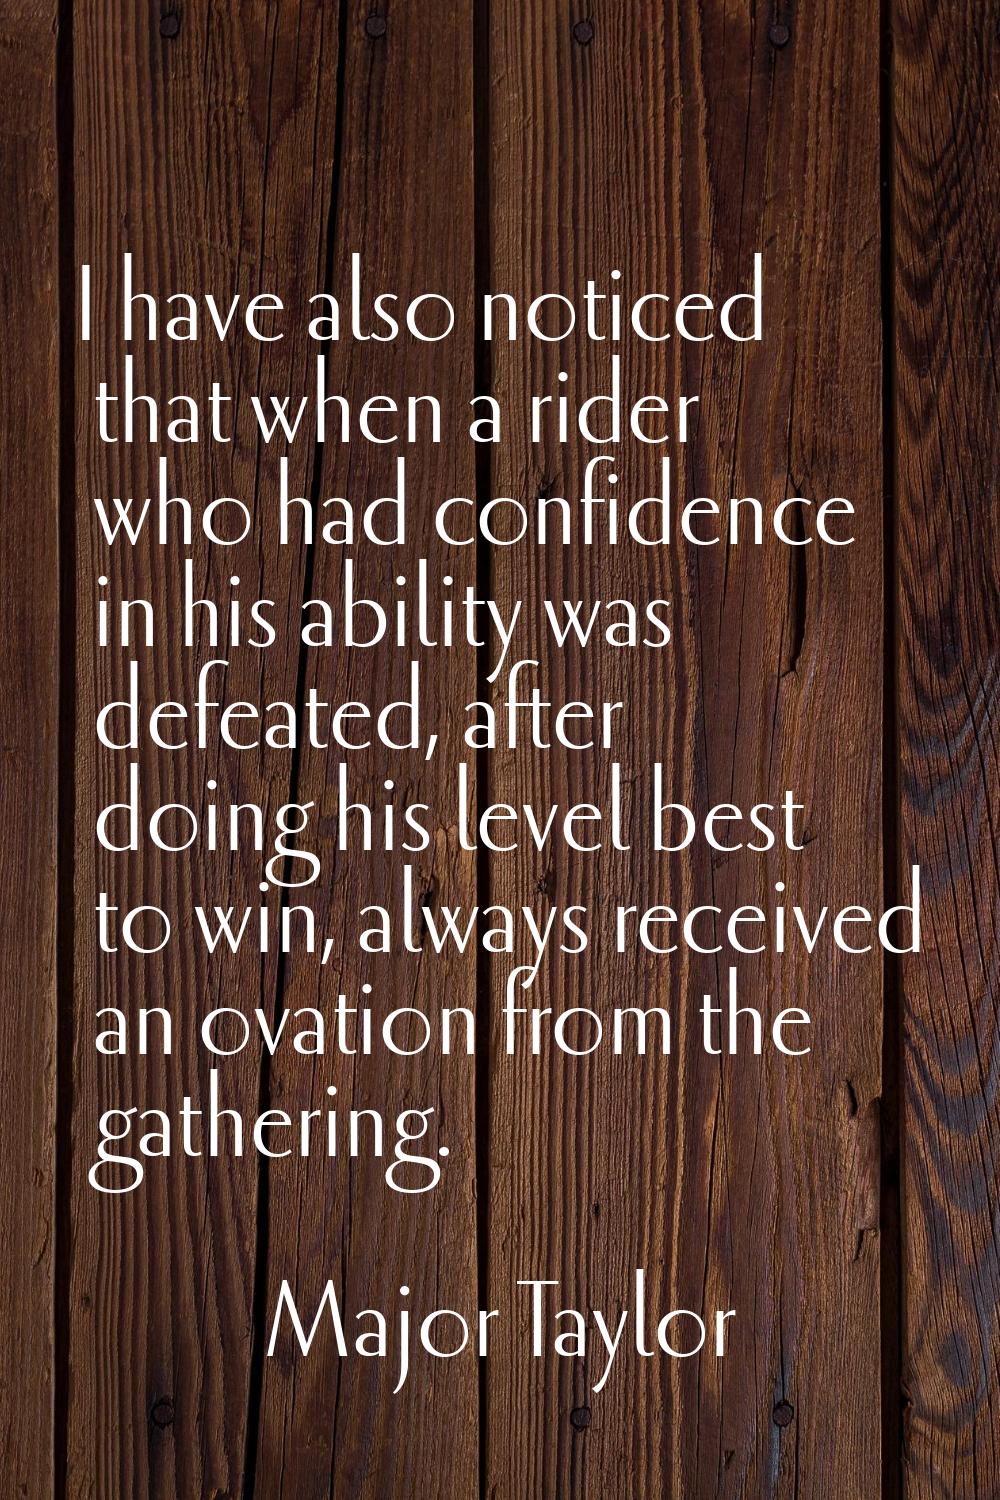 I have also noticed that when a rider who had confidence in his ability was defeated, after doing h